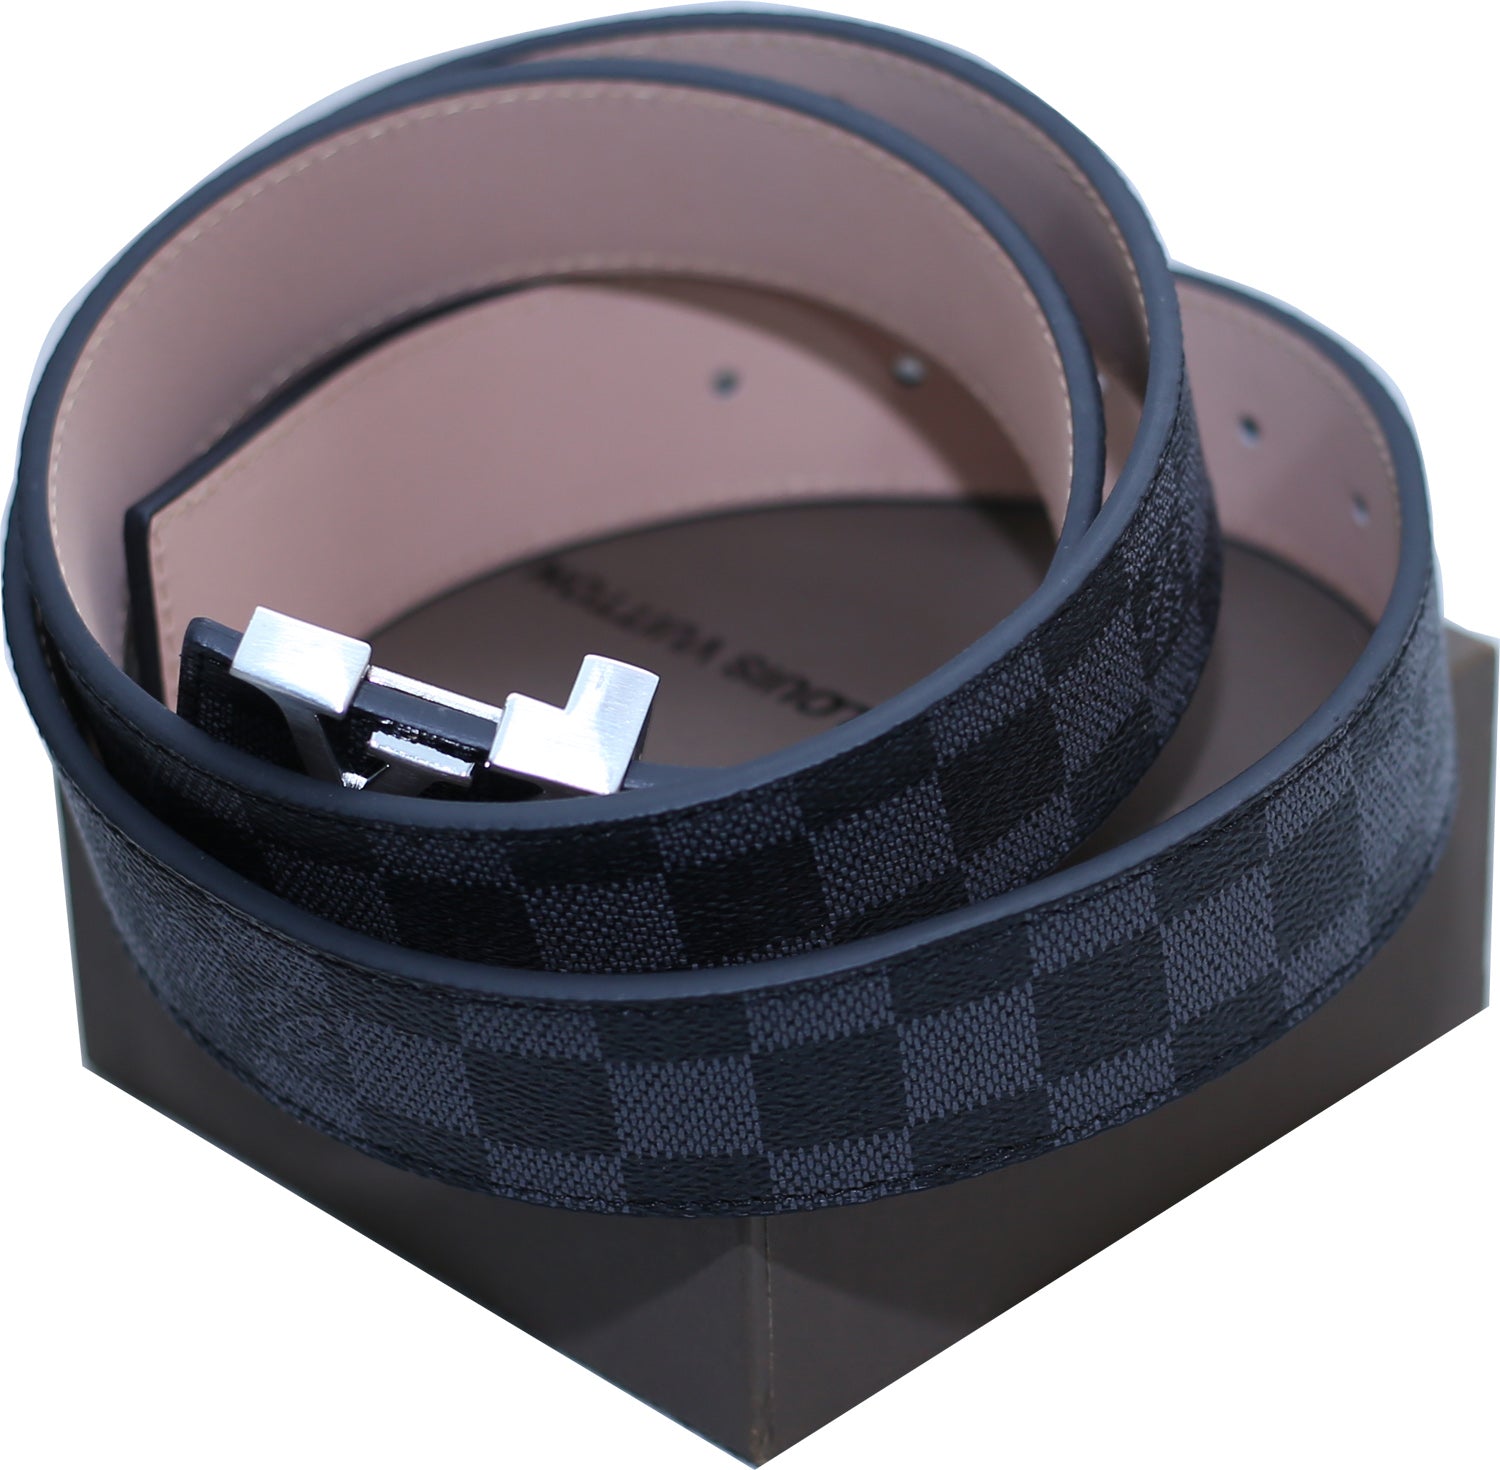 Lv Belt With Box Best Price In Pakistan, Rs 2500